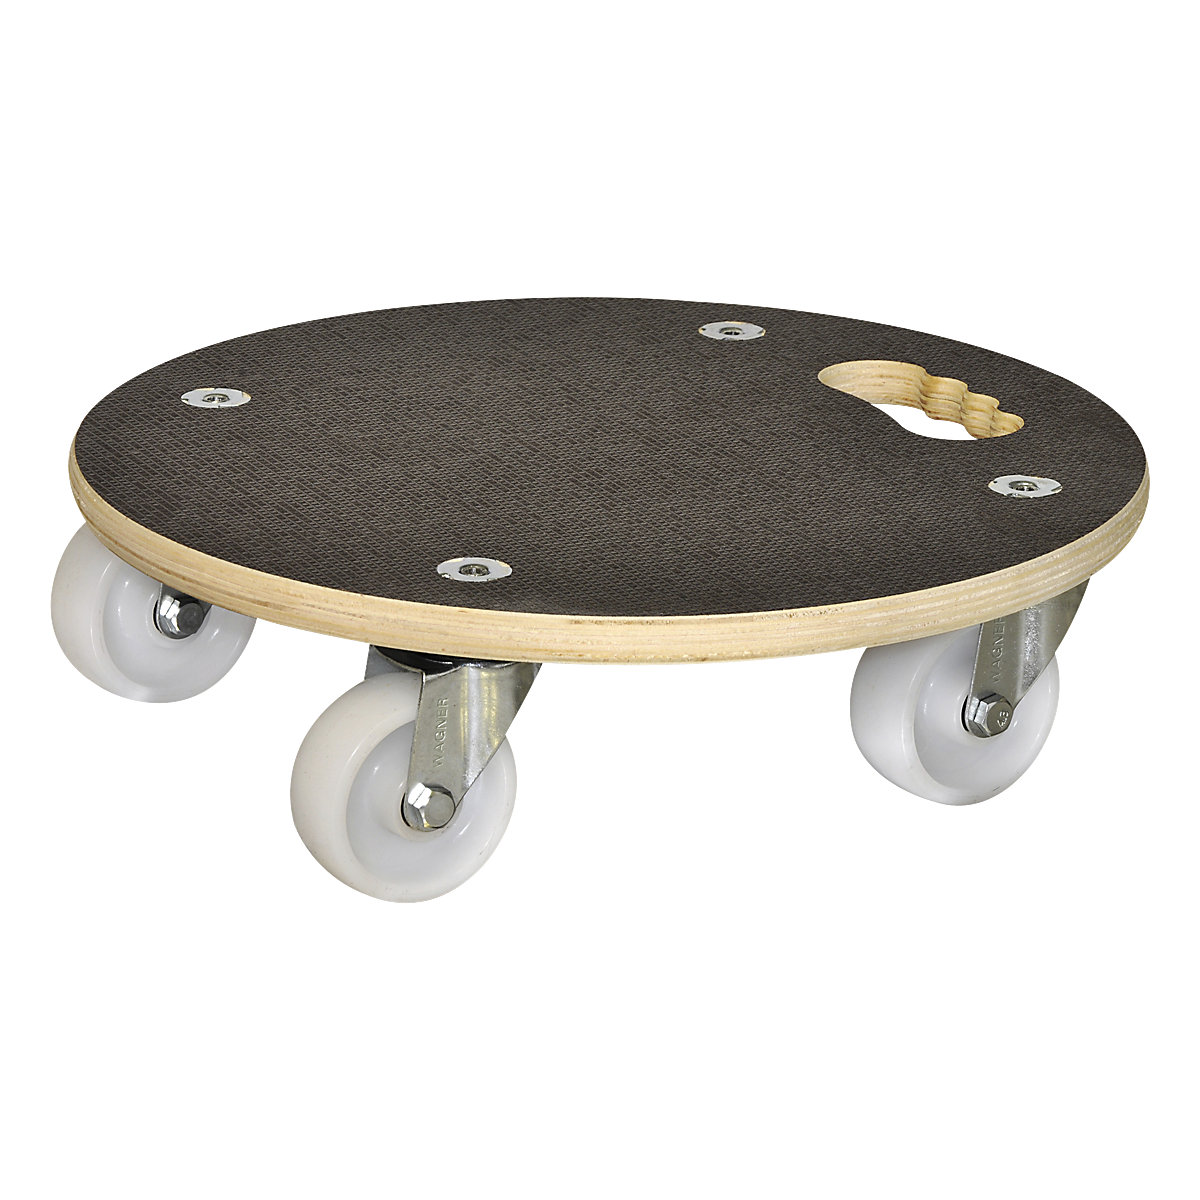 MaxiGRIP transport dolly, round – Wagner, GH 1108, phenolic plywood panel, Ø 380 mm, max. load 250 kg, 5+ items-1